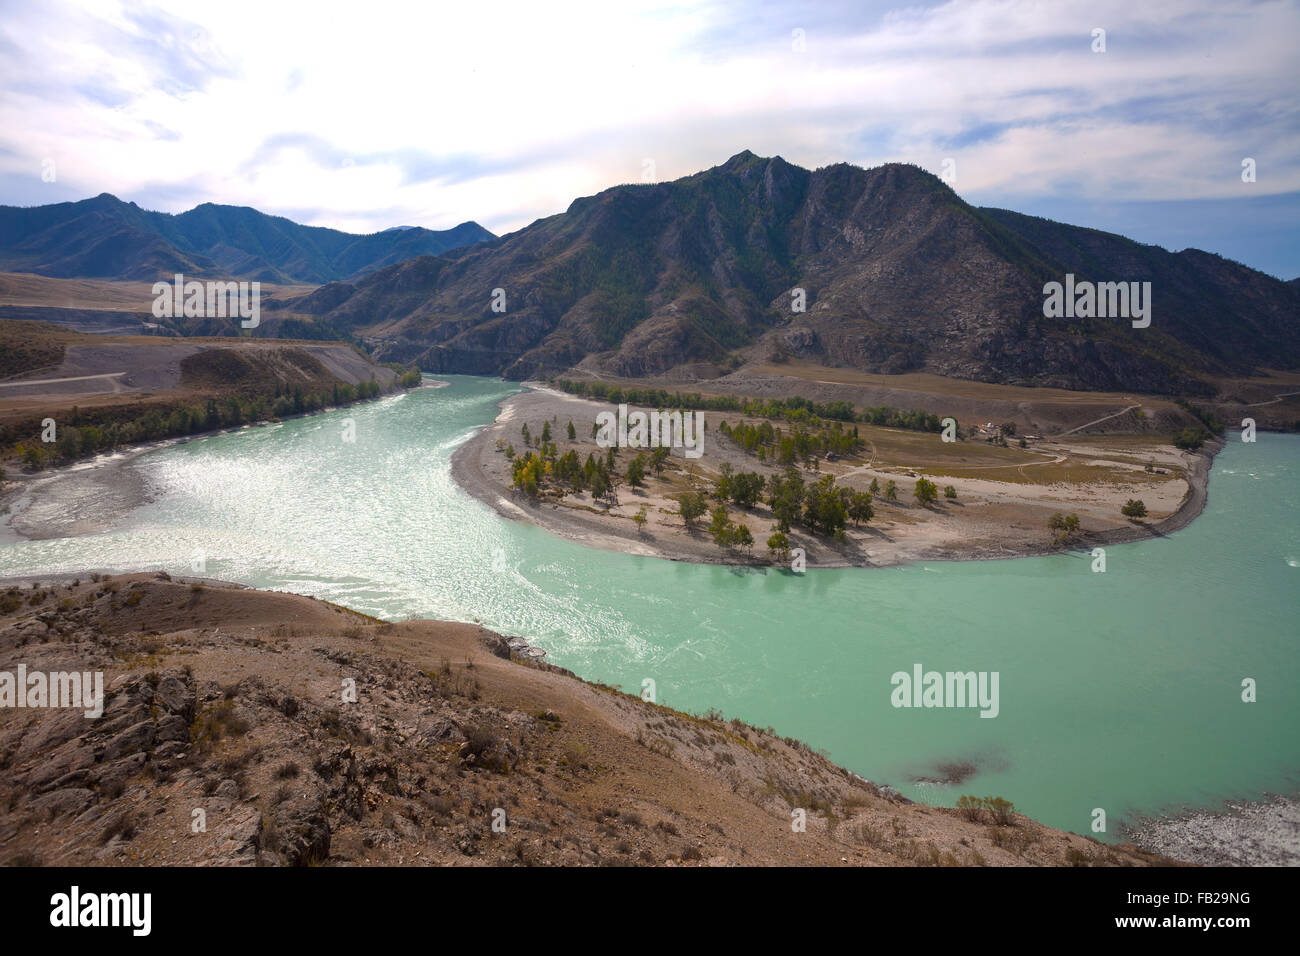 View of the confluence of the Chuya and Katun rivers, Katun valley, Altai Mountains, Russia Stock Photo